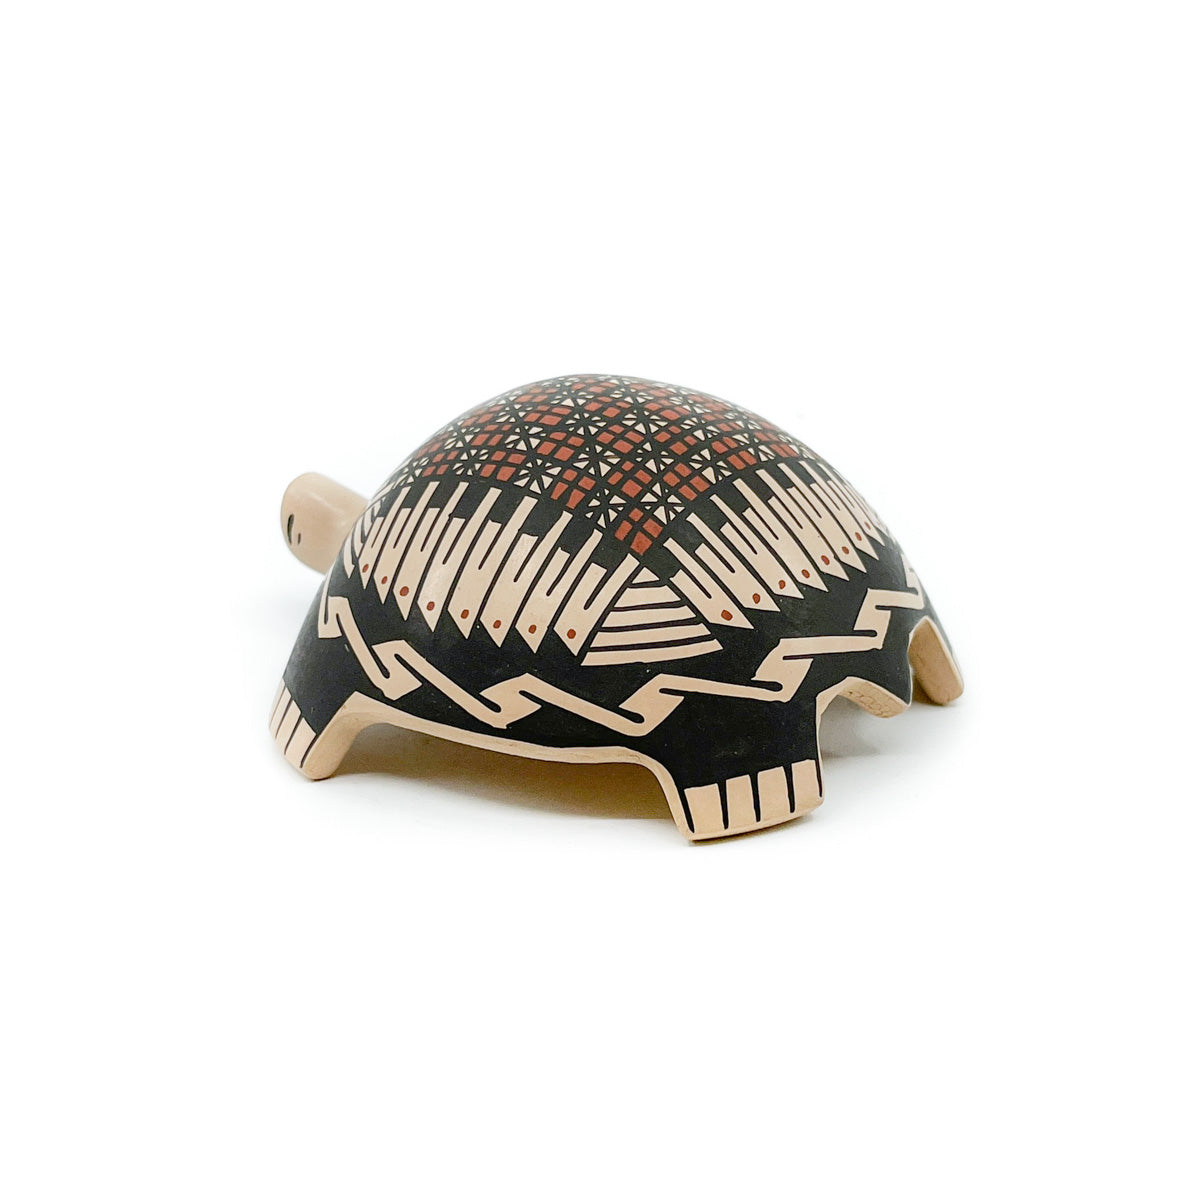 Small Turtle Sculpture with Checkerboard and Feather Motif